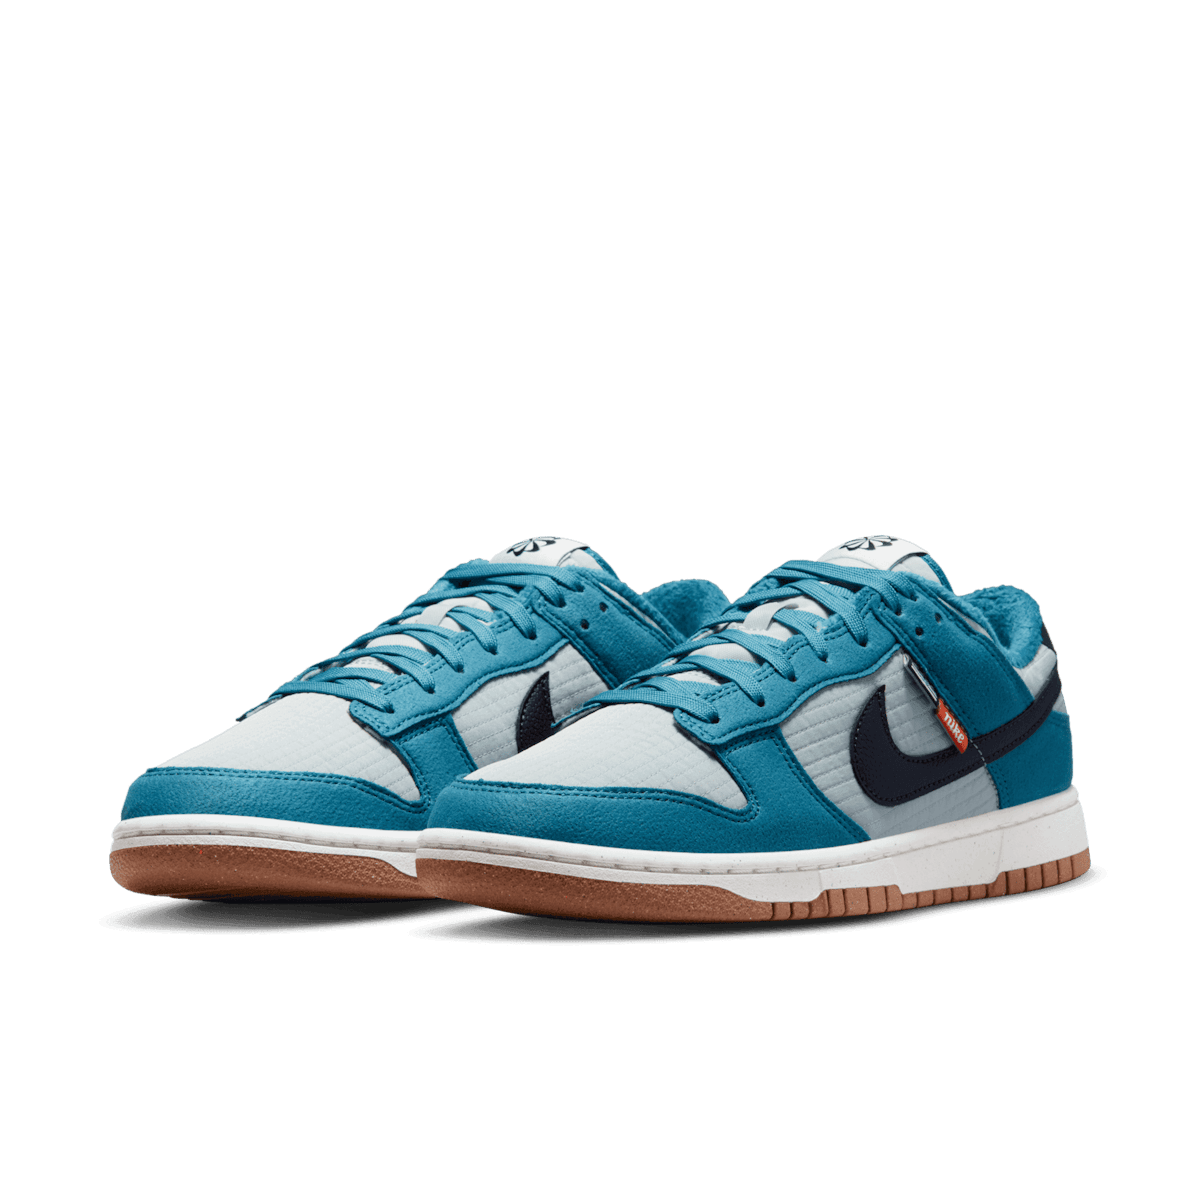 Nike Dunk Low SE Toasty Rift Blue - DD3358-400 Raffles and Release